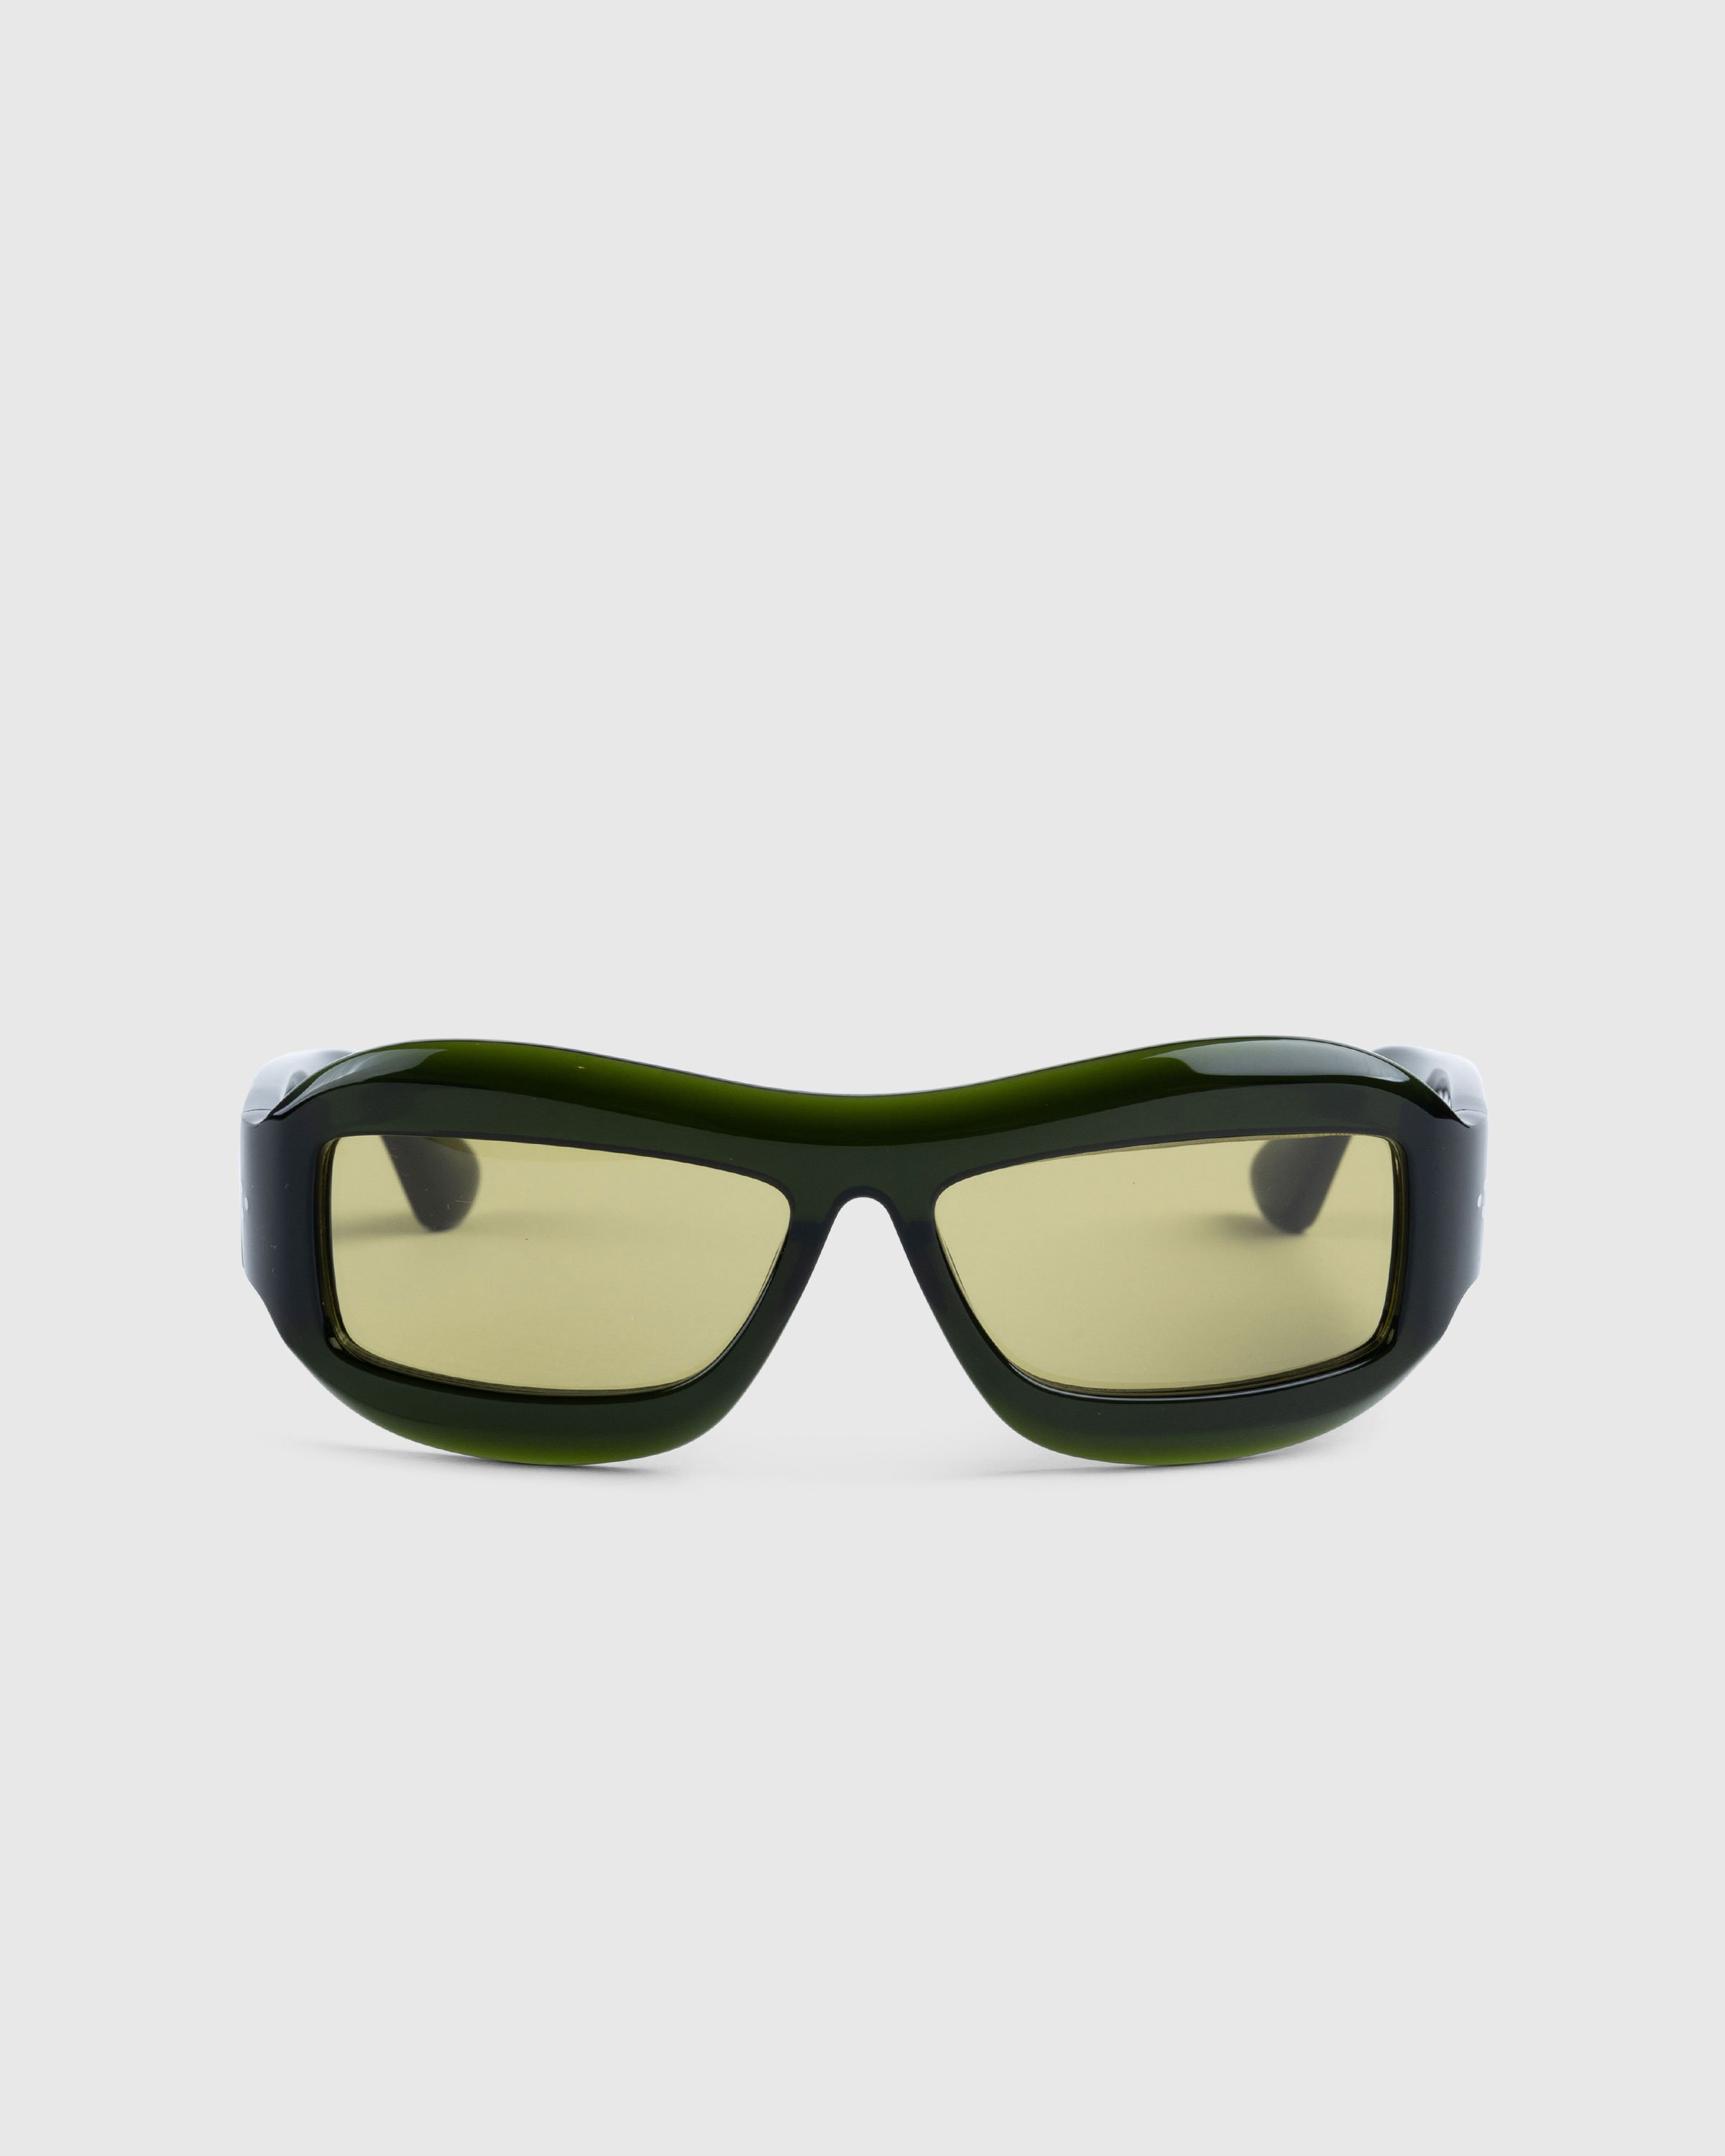 Port Tanger - Zarin Cardamom Acetate/Warm Olive Lens - Accessories - Green - Image 1